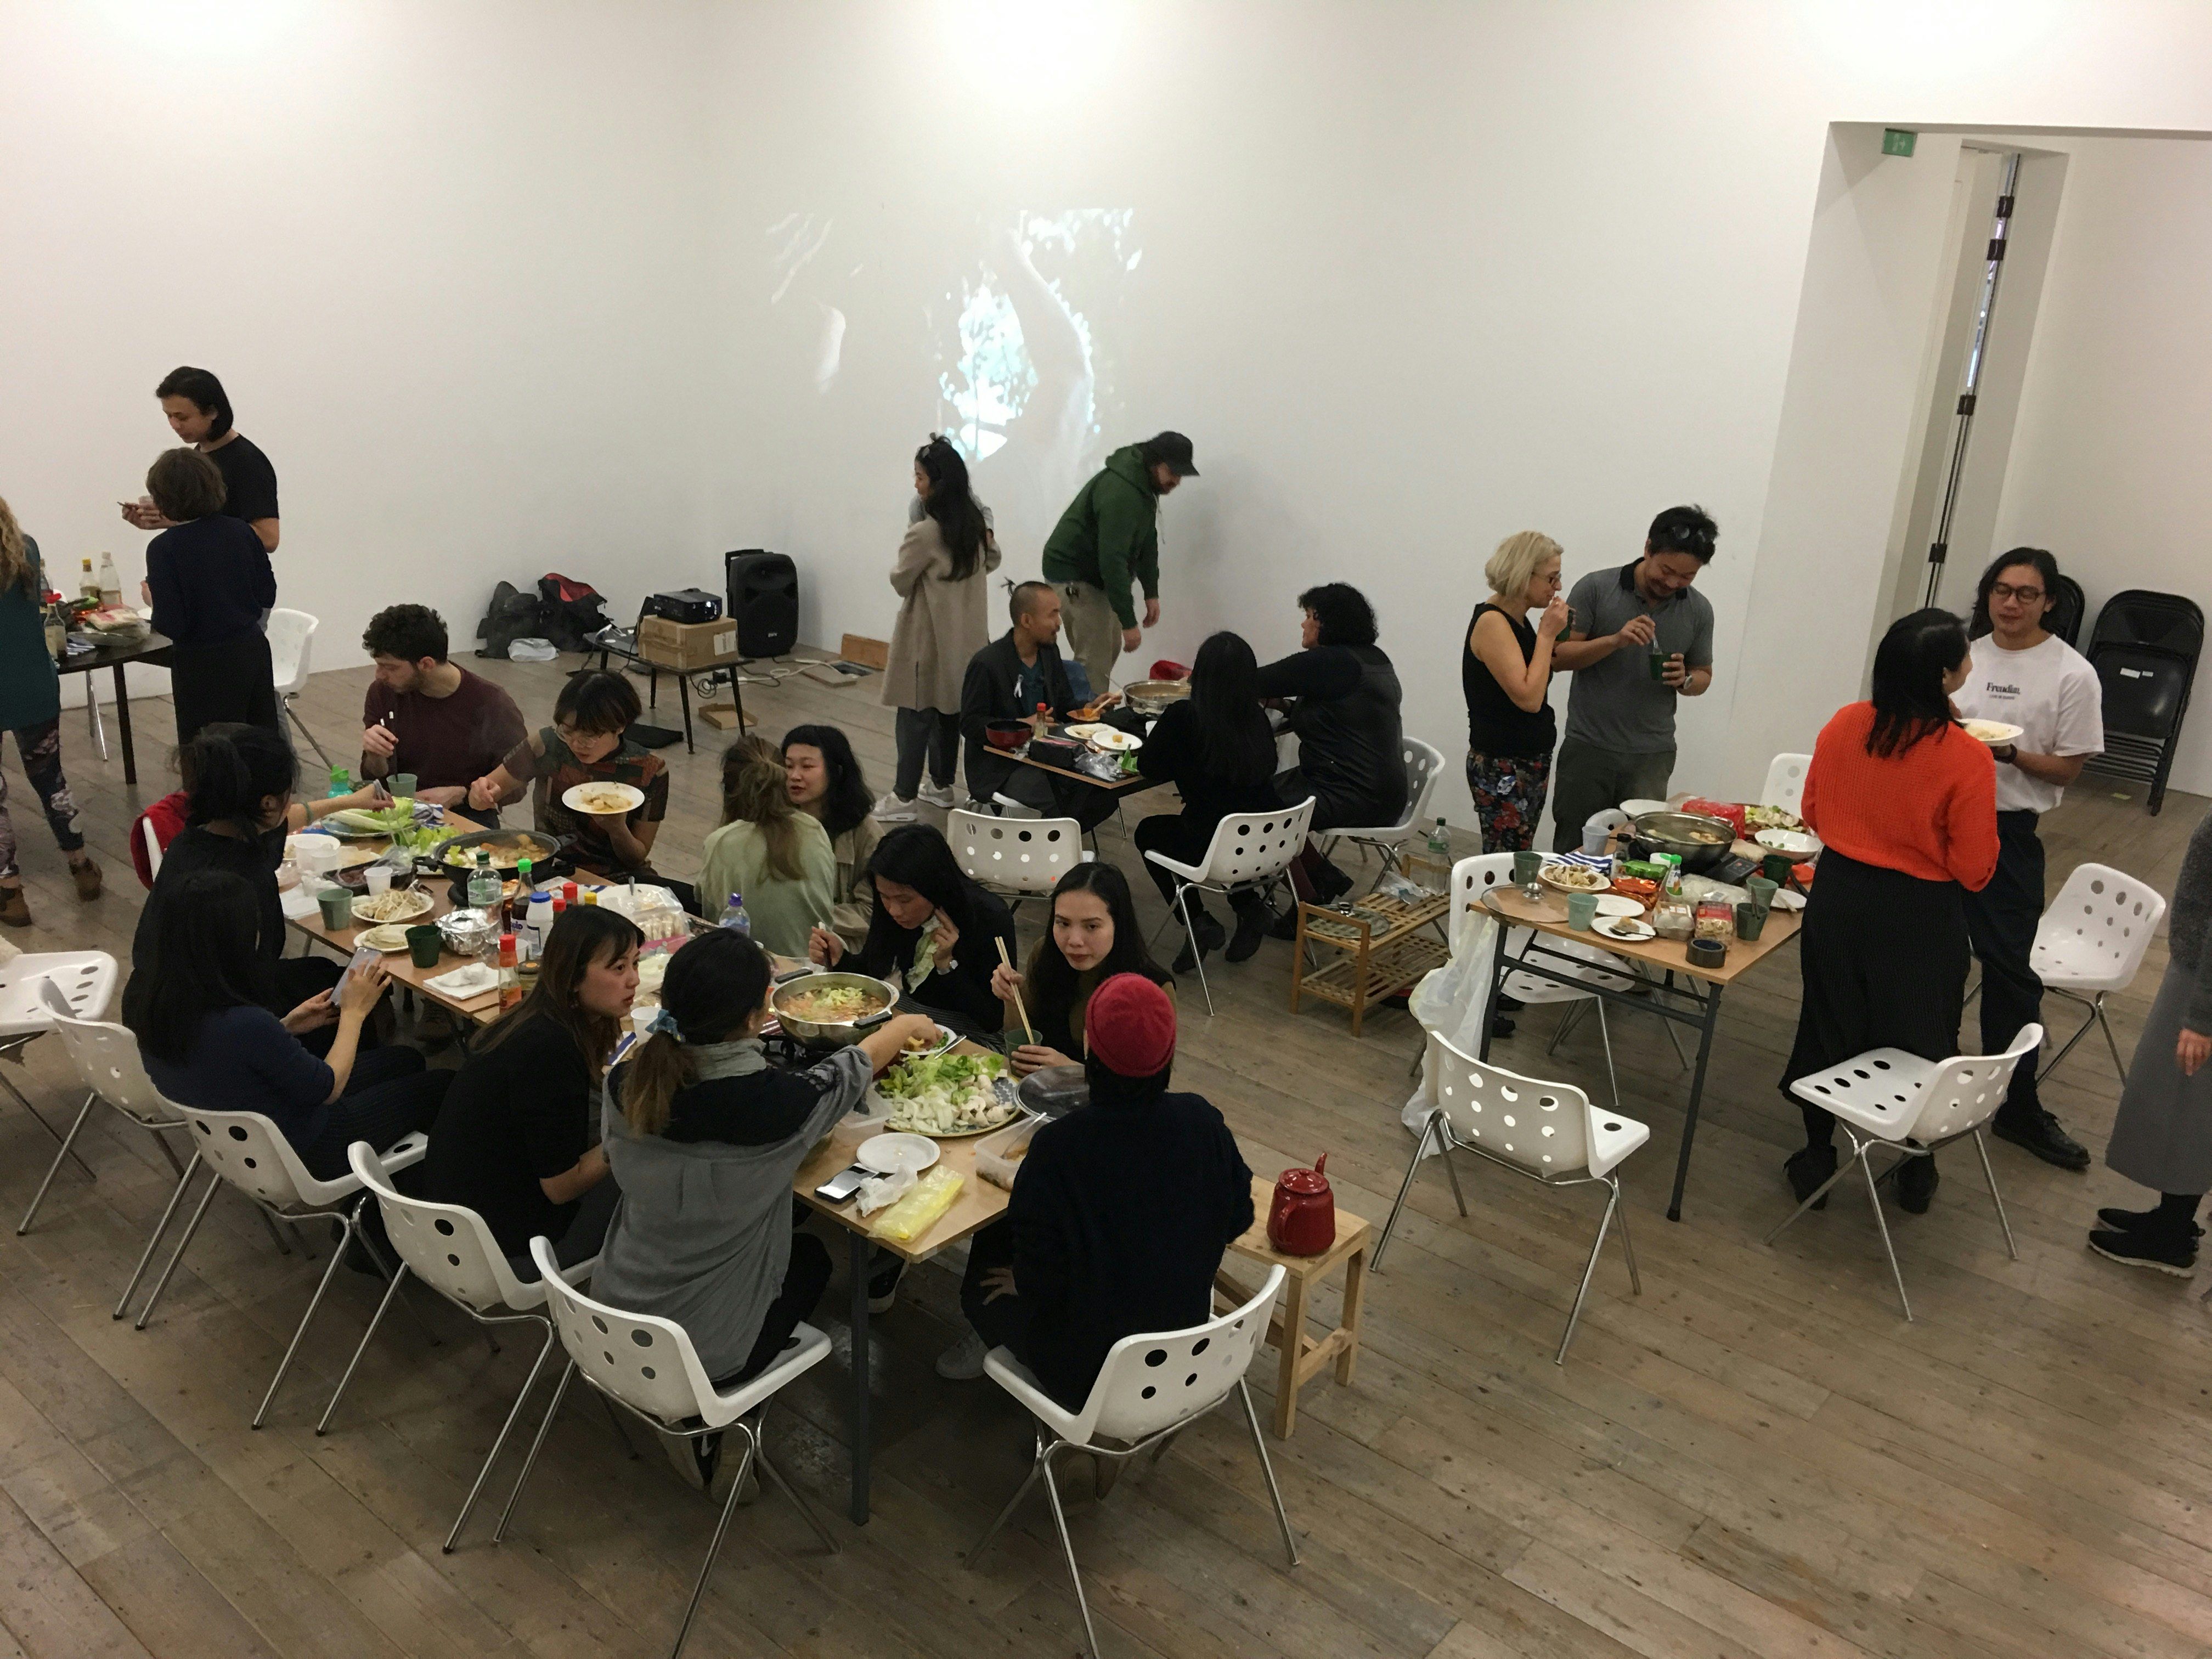 A gallery set up as a dining space, with one long dining table serving hotpot and surrounding smaller tables where patrons eat together.